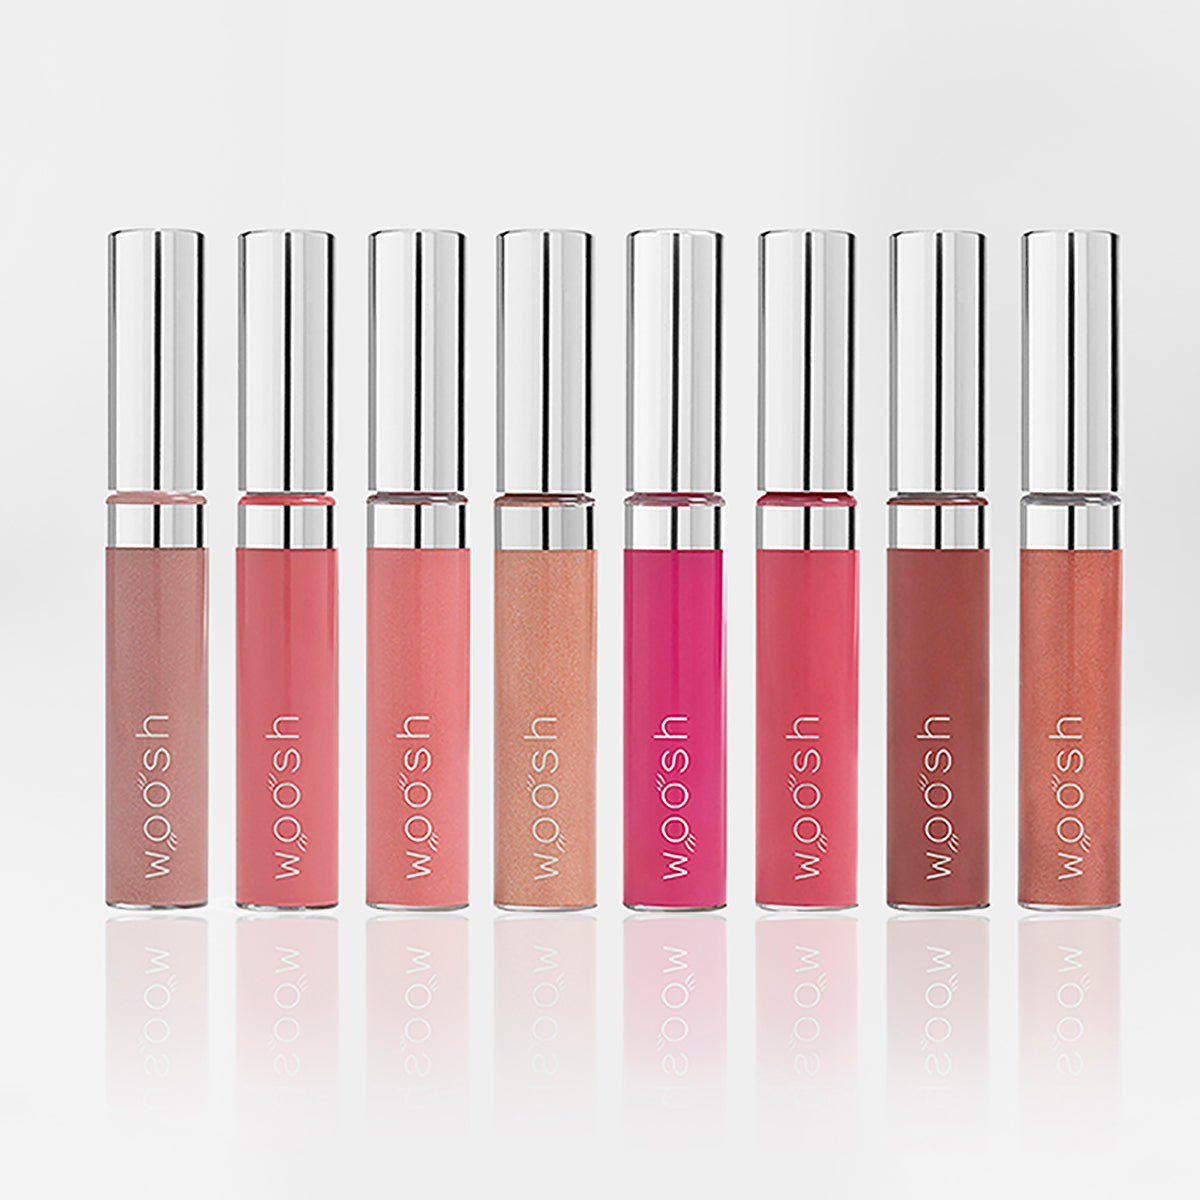 The boss gloss bundle in shades beige frosted (shimmer), beige natural, glam taupe (shimmer), glam peach (shimmer), pink sheer, pink natural, rich toast (shimmer), and rich copper (shimmer)